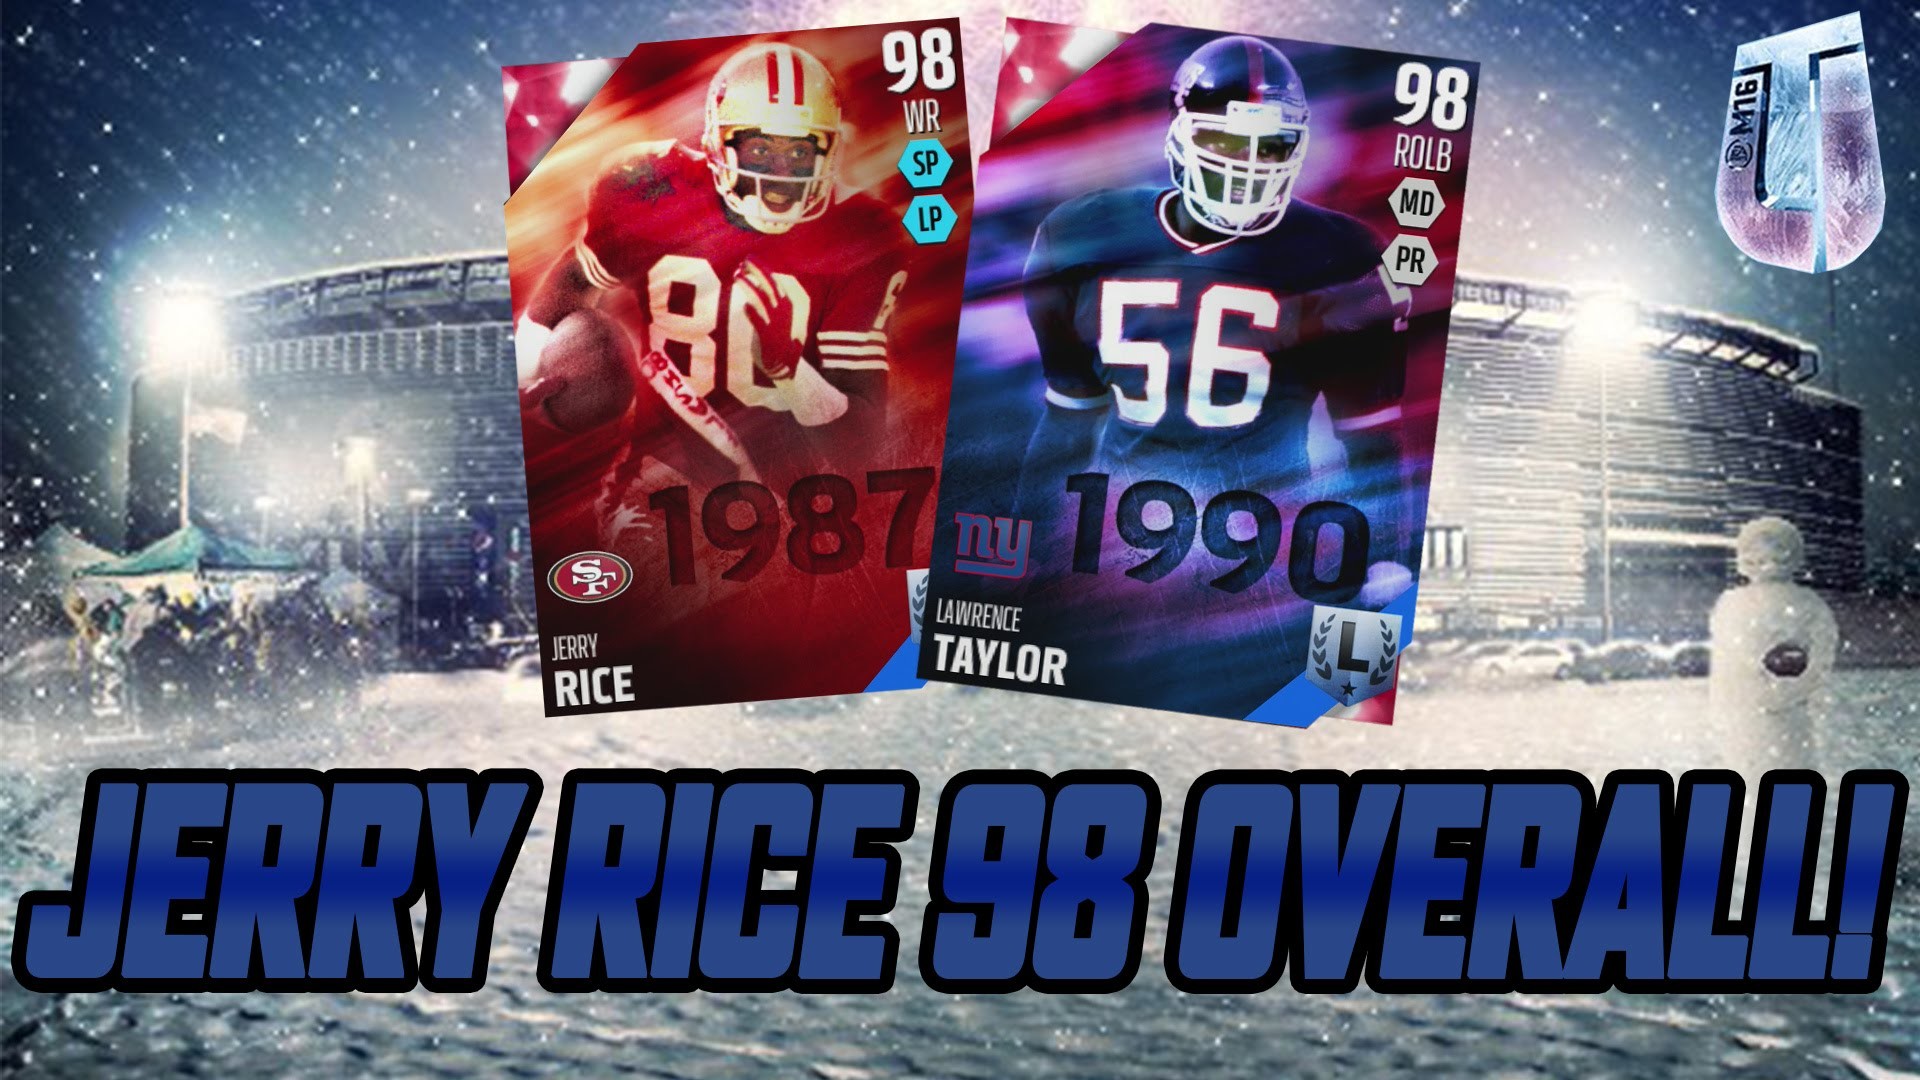 JERRY RICE 98 OVERALL! OMG GIFT REVEAL DAY 2! – Madden 16 Ultimate Team –  YouTube